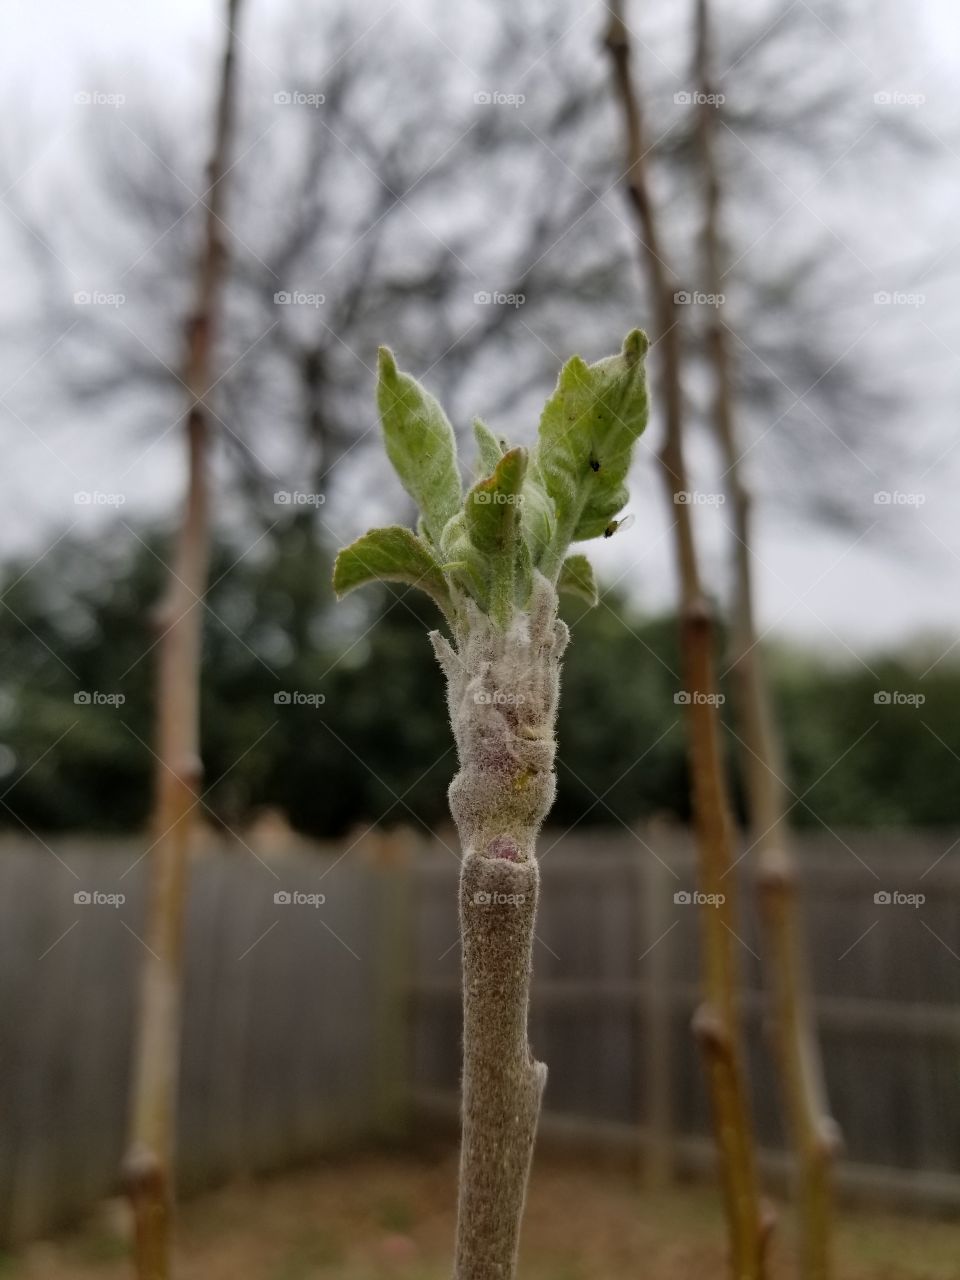 Spring has sprung. New growth on the apple tree.